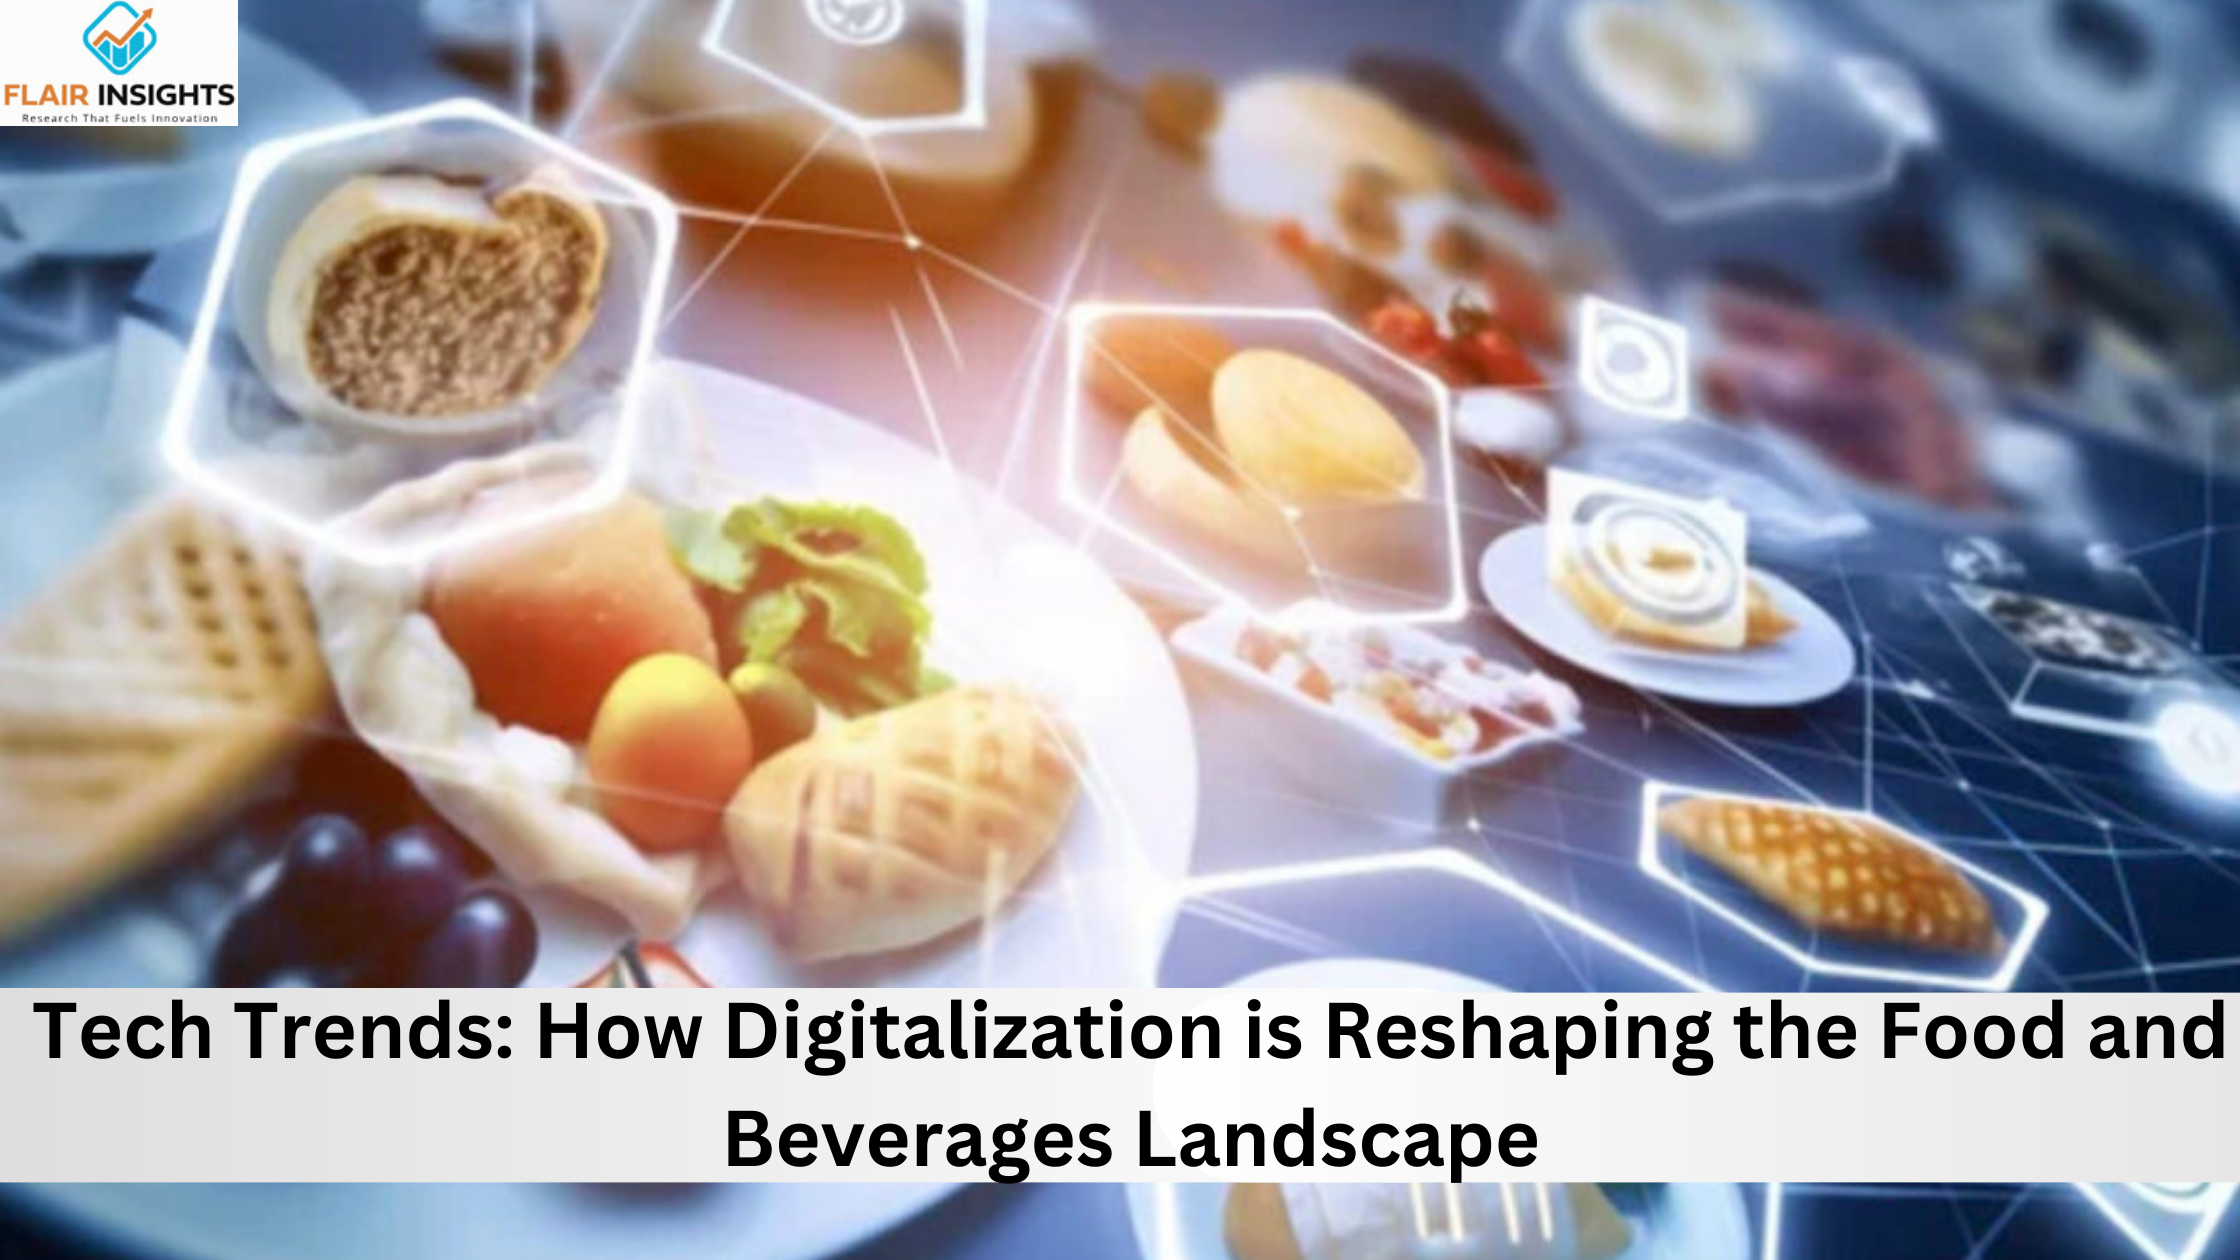 Tech Trends: How Digitalization is Reshaping the Food and Beverages Landscape